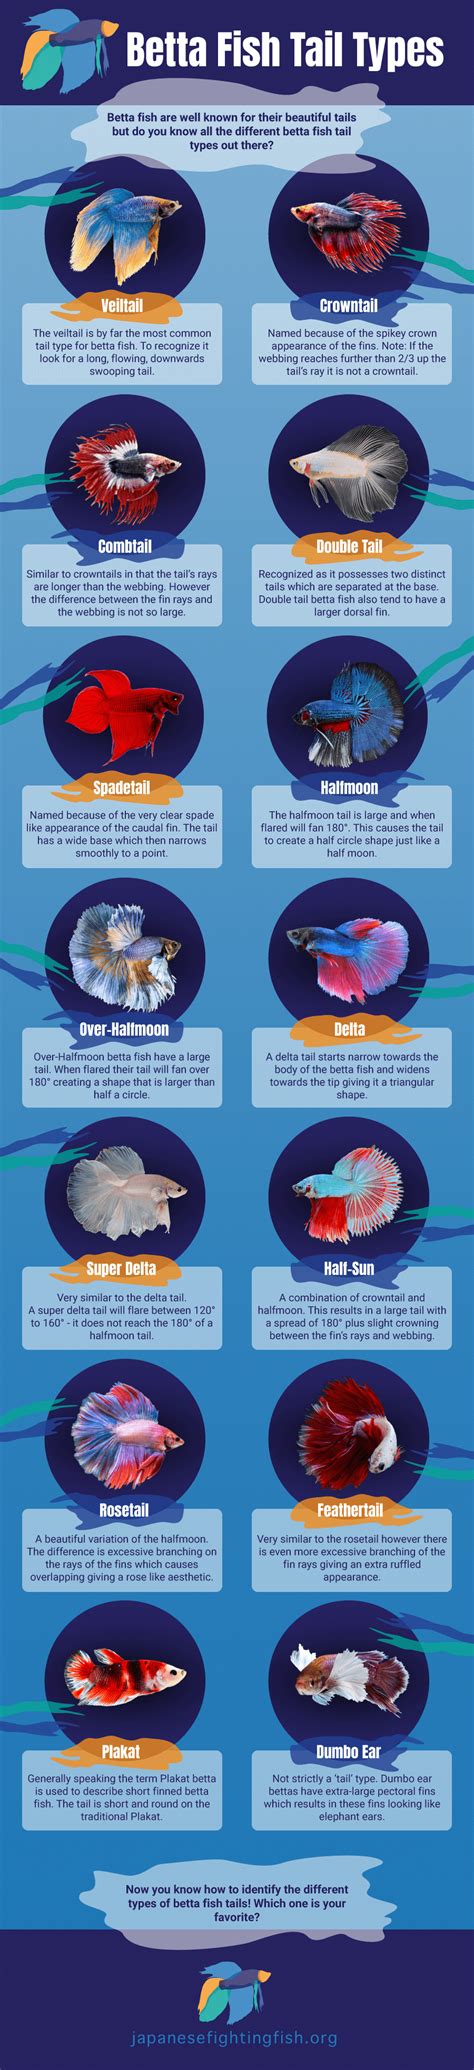 28 Types of Betta Fish: Top Colors, Tails & Patterns